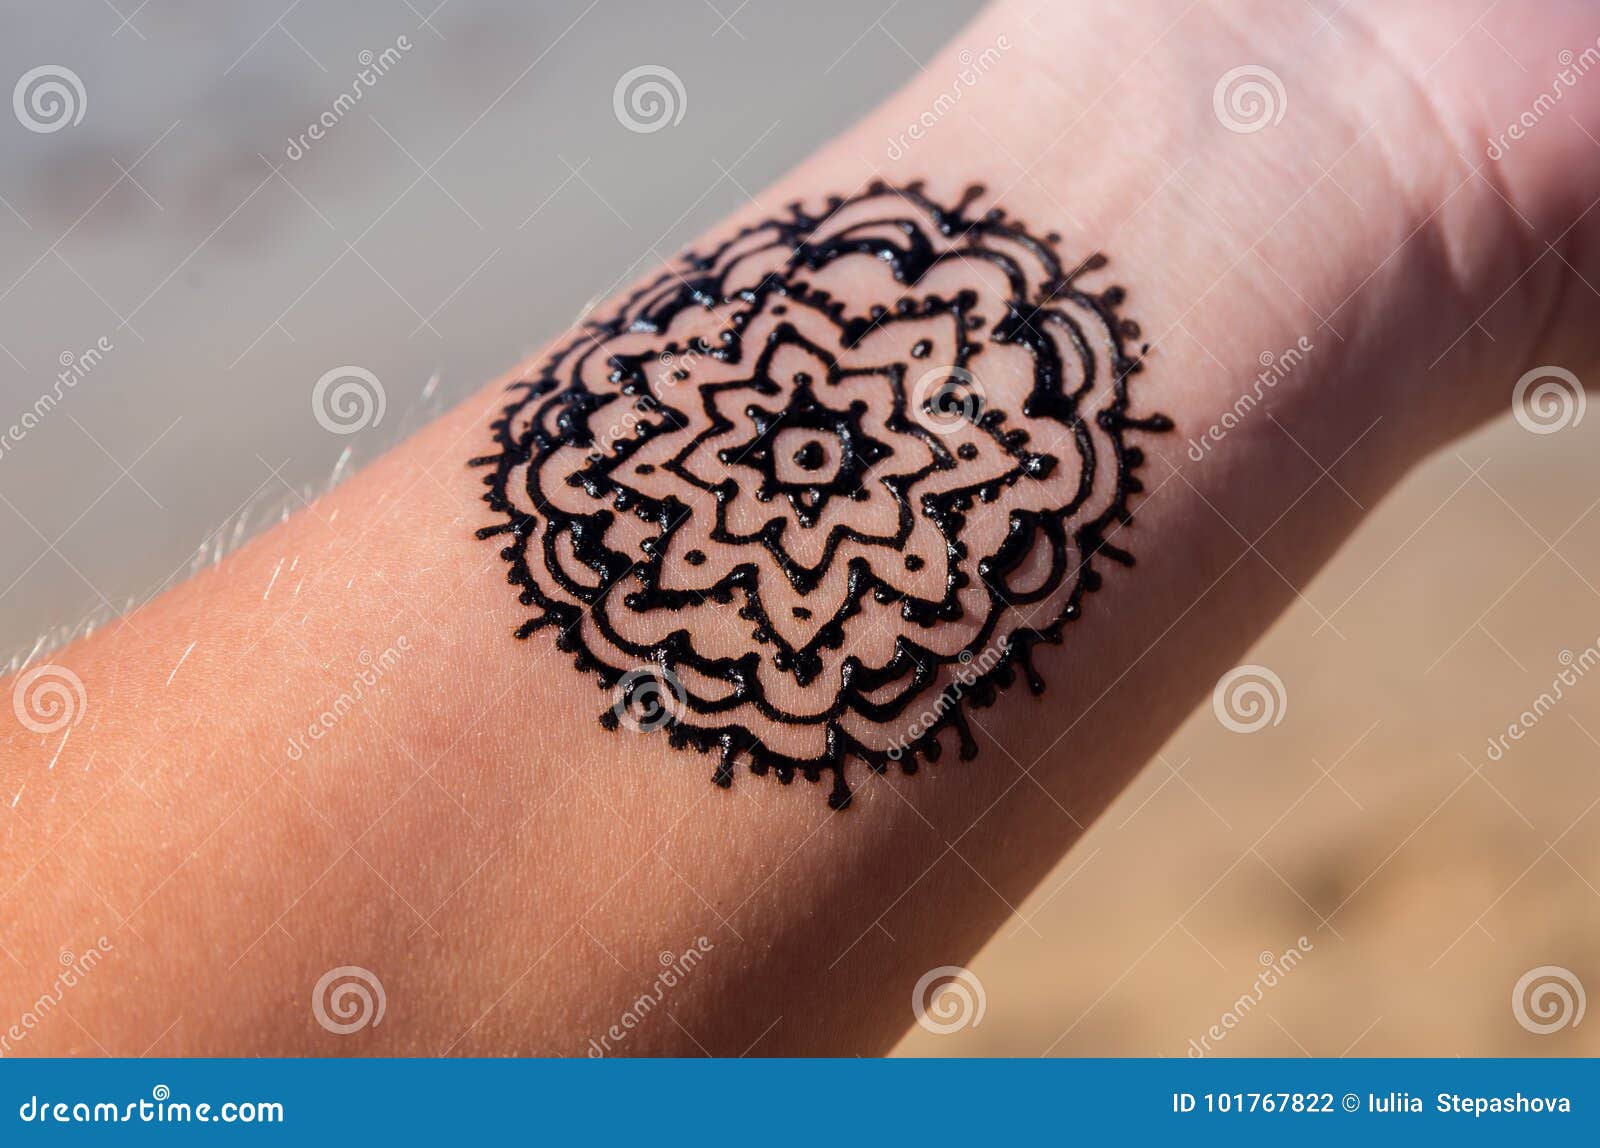 30k+ Henna Tattoo Pictures | Download Free Images on Unsplash